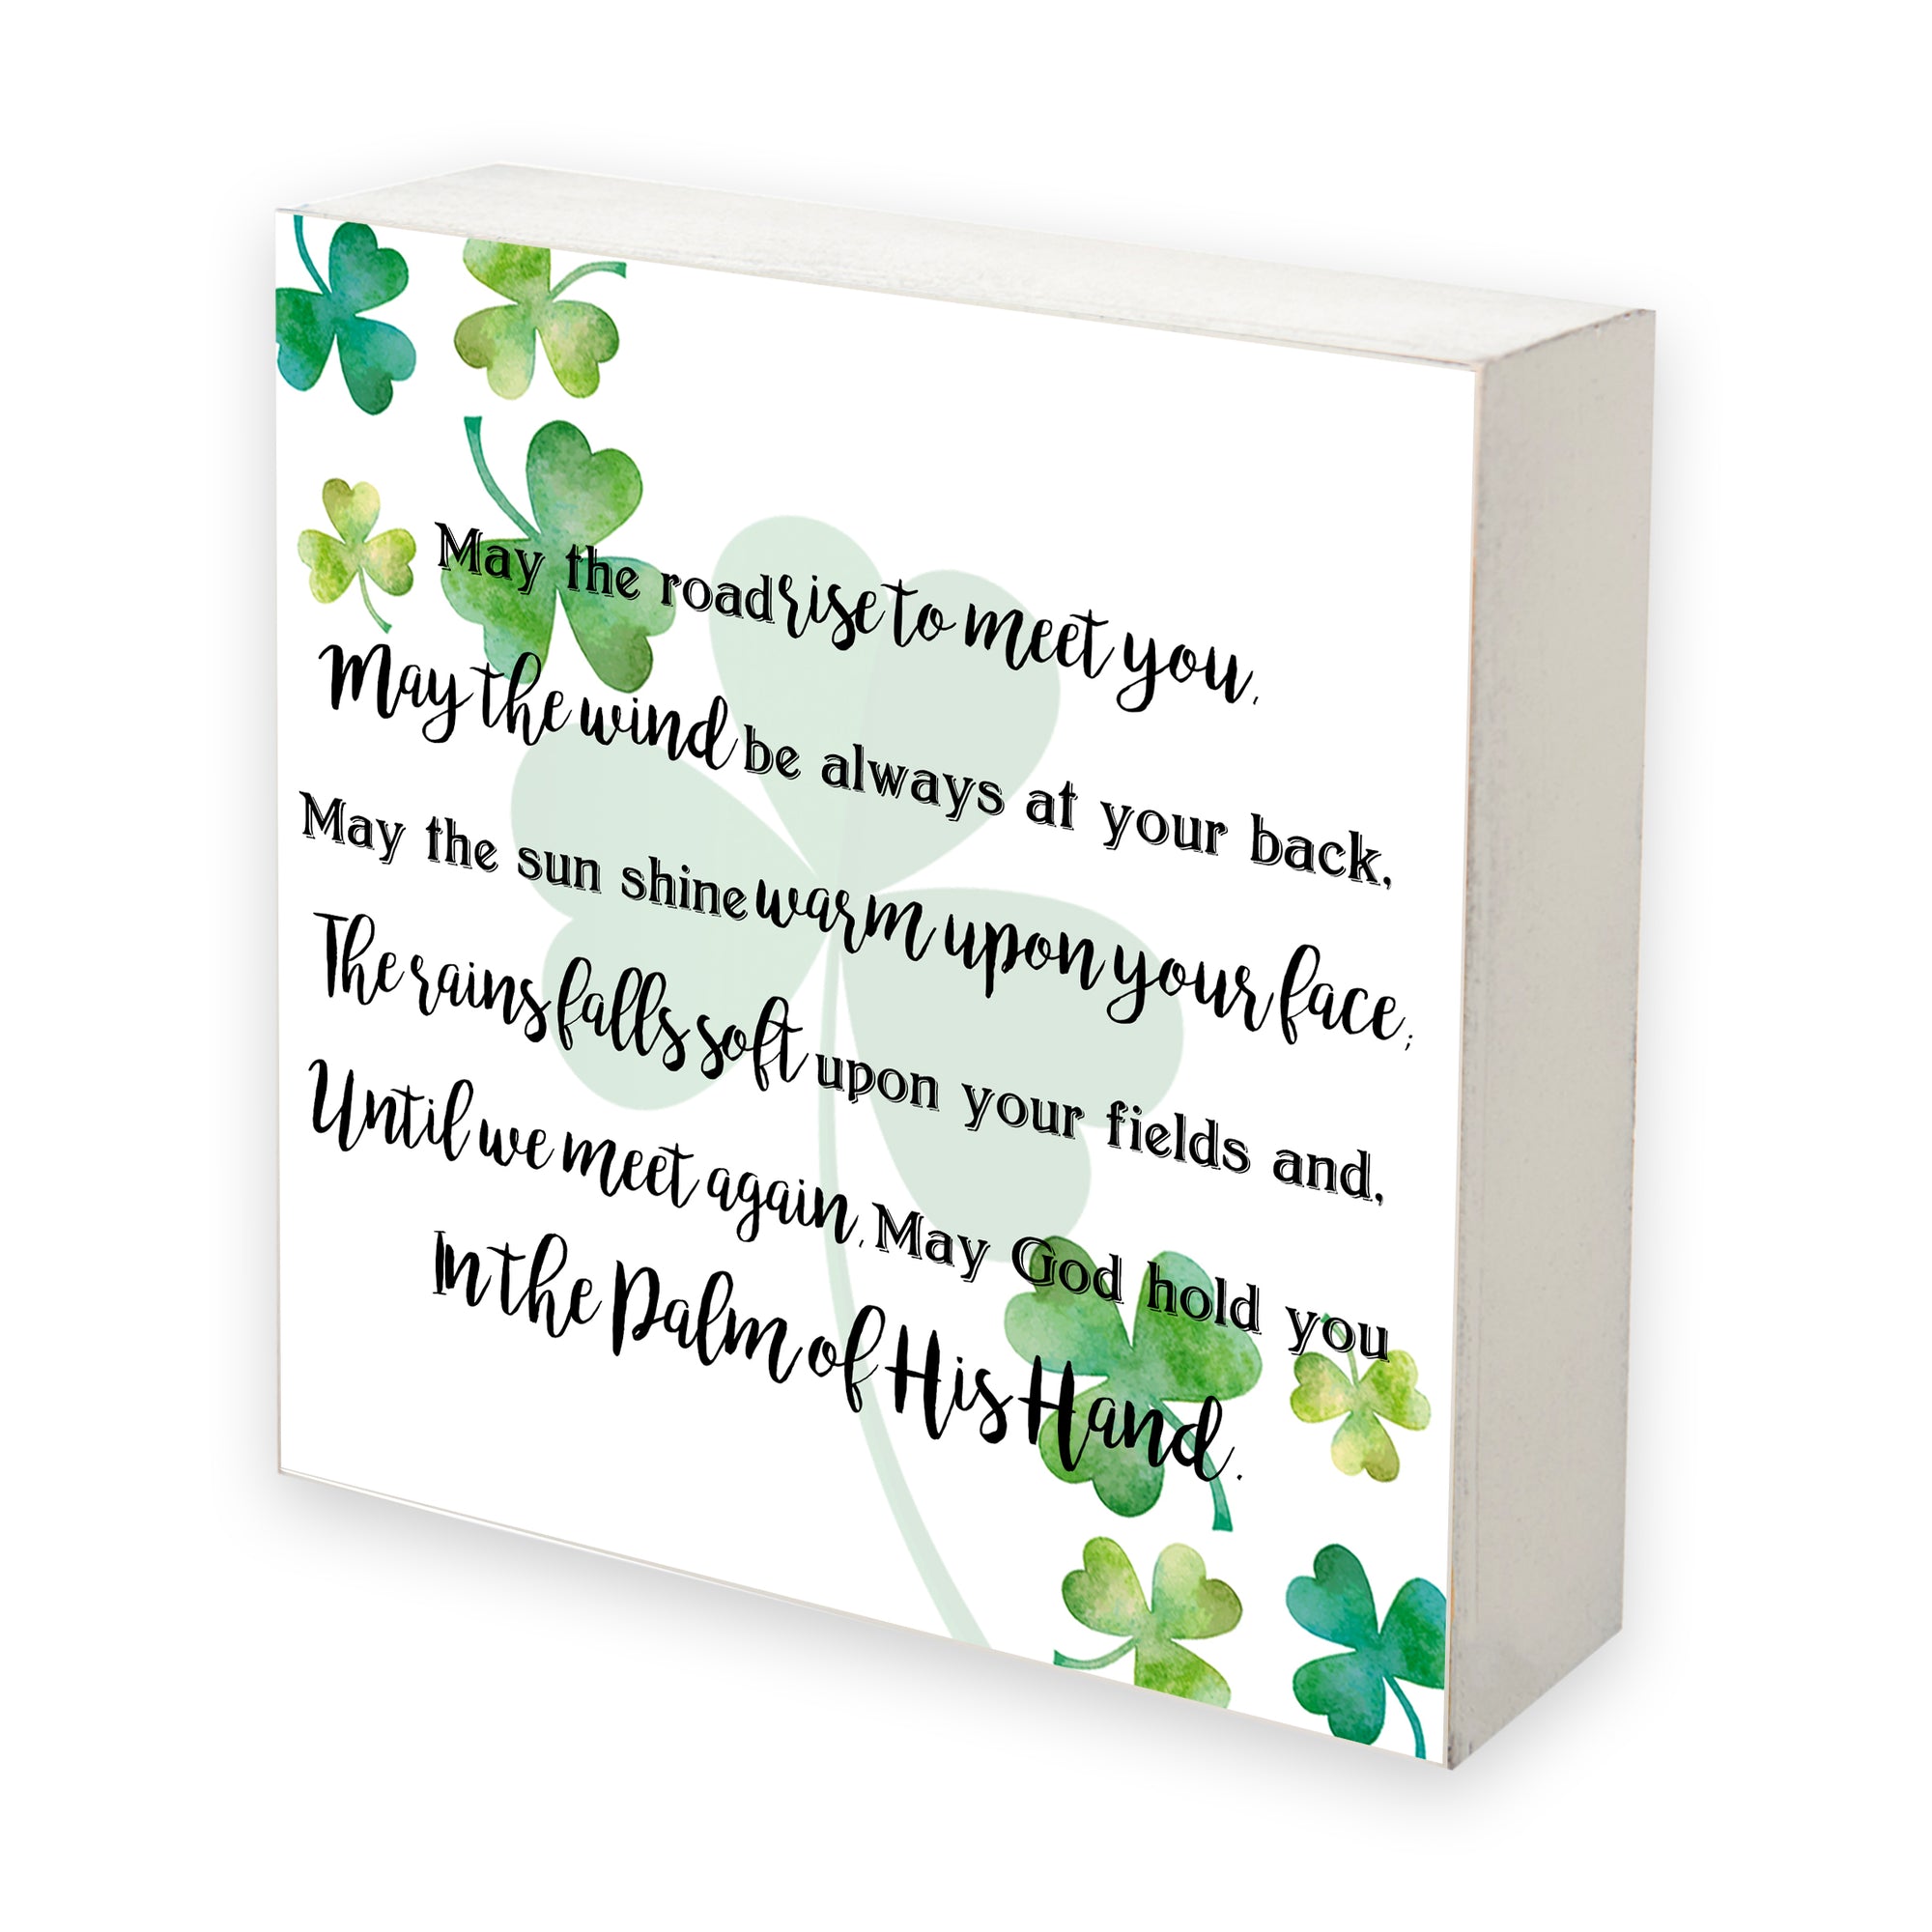 St. Patrick's Day Irish Everyday Shadow Box 6x6 - May The Road Rise To